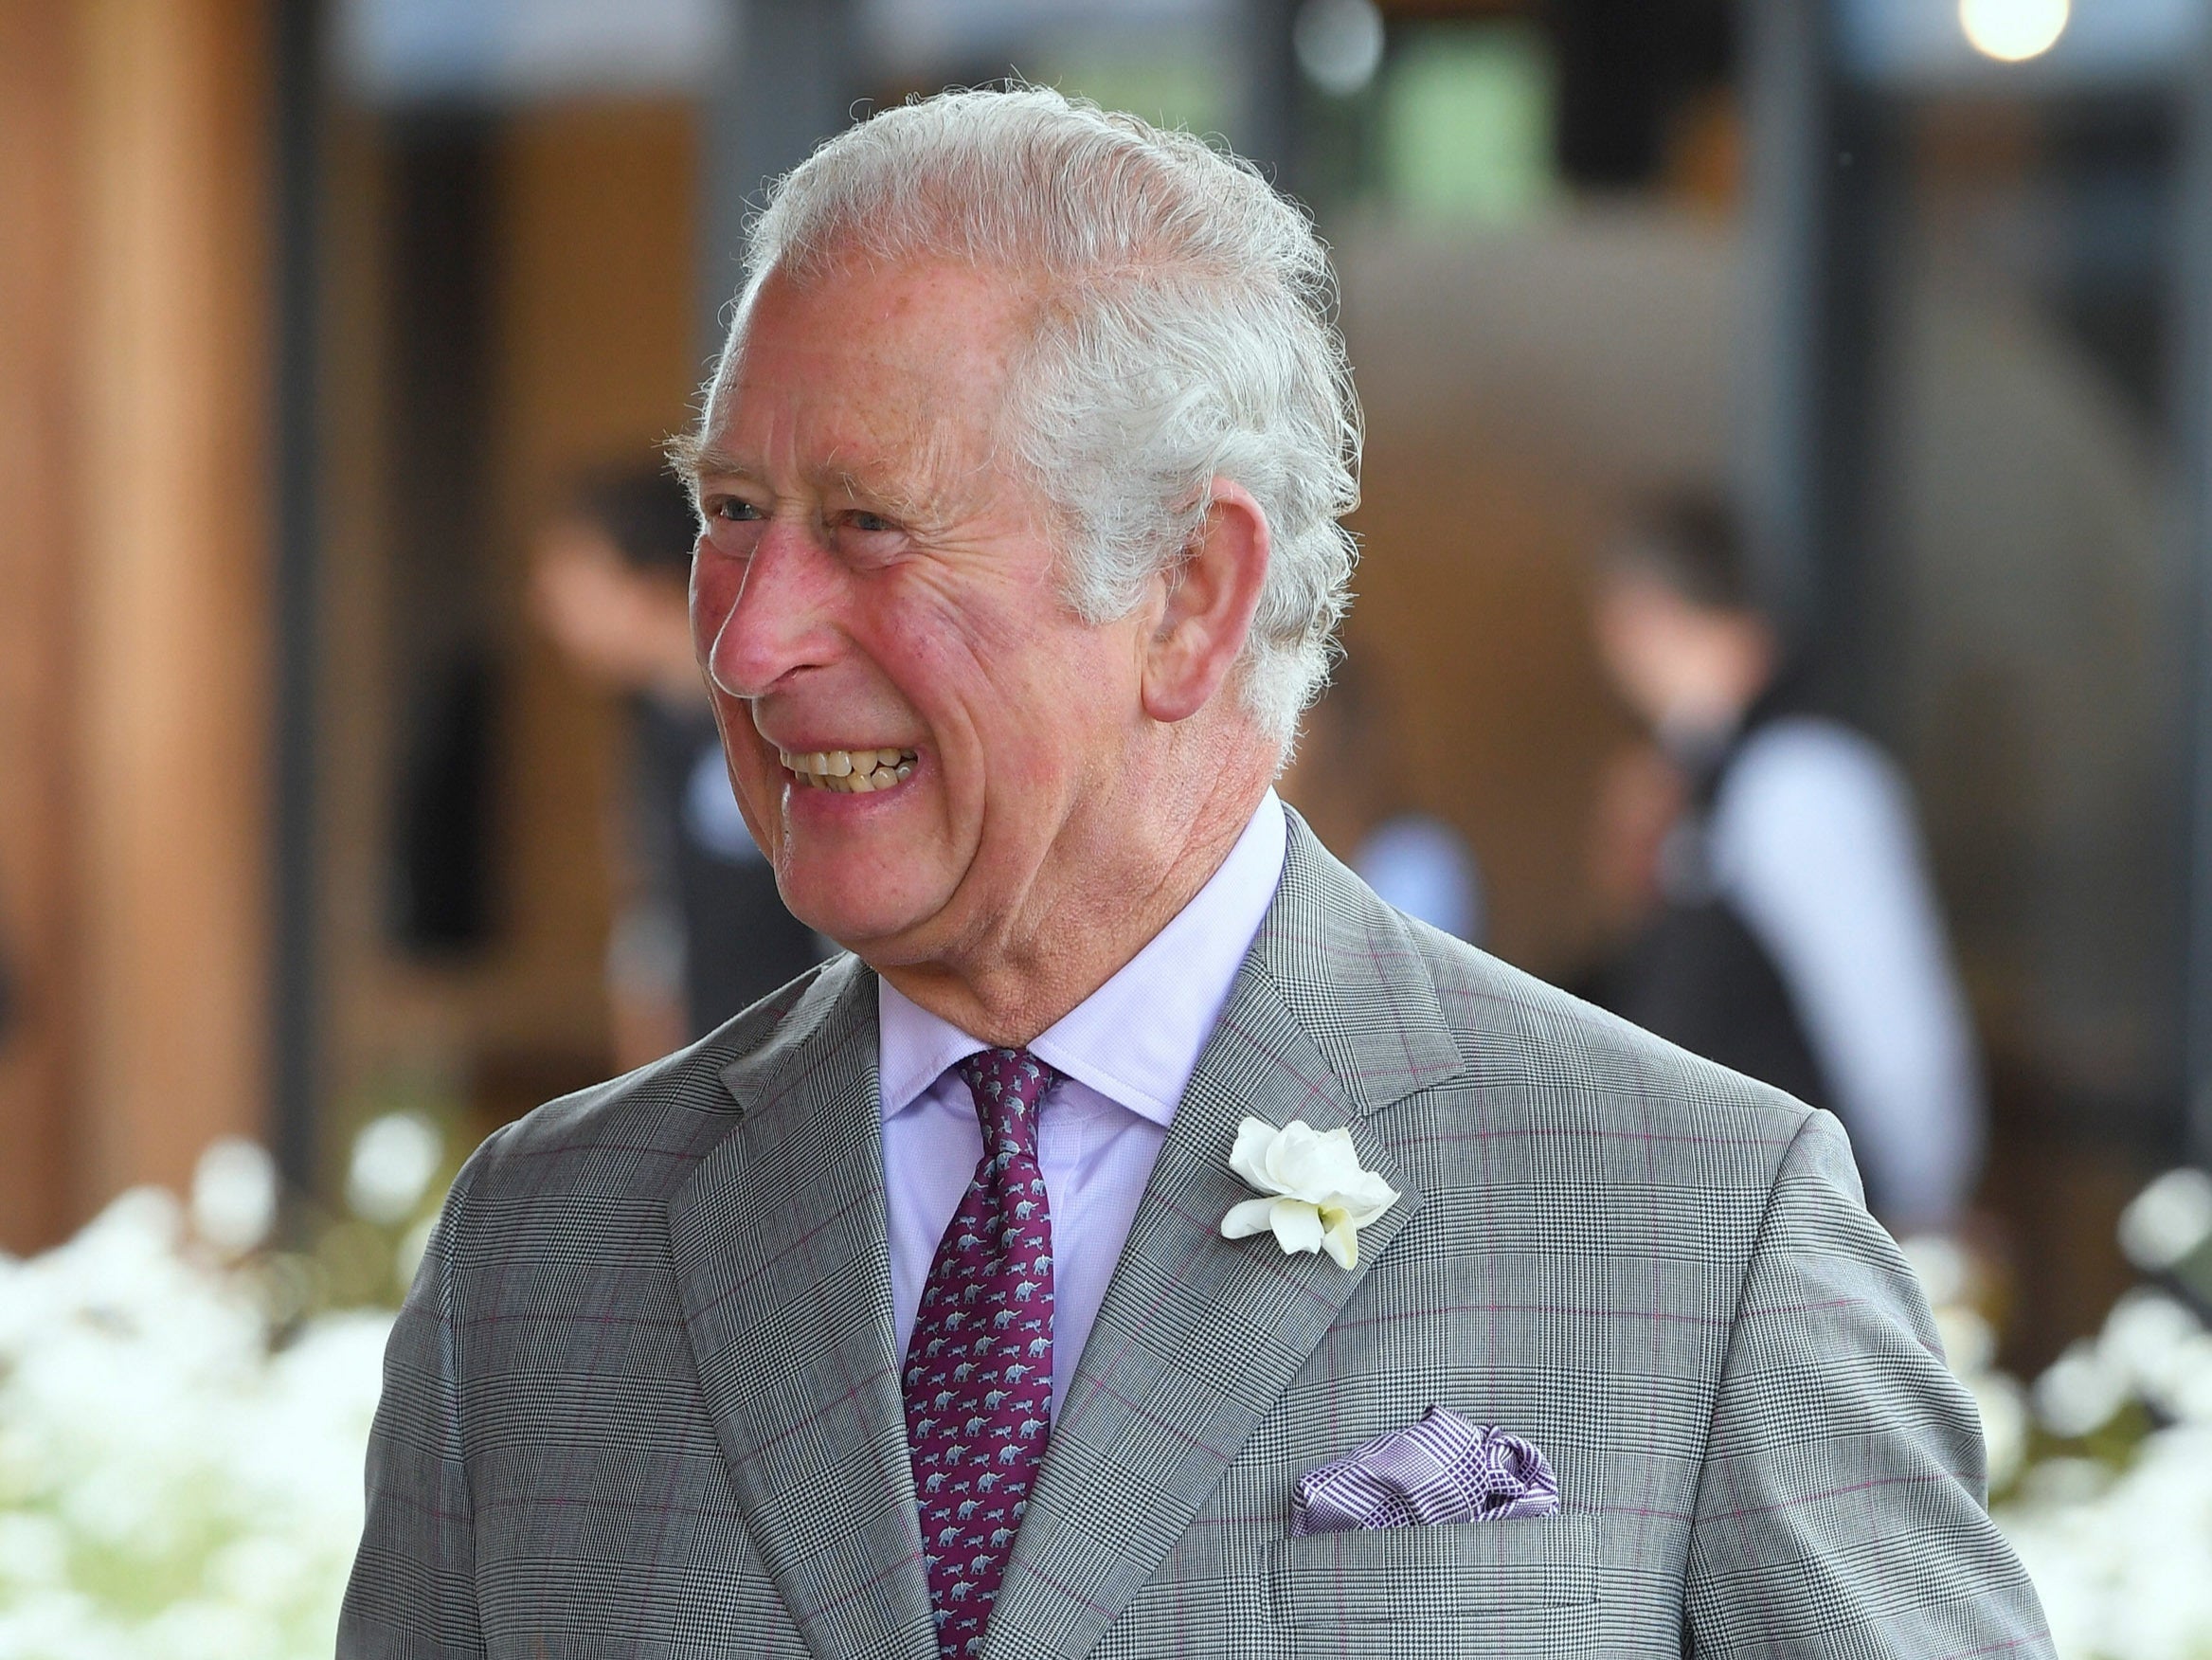 Prince Harry’s spokesman says the ‘substantial sum’ given by Prince Charles was not in the same period to which the duke was referring when he complained of being cut off